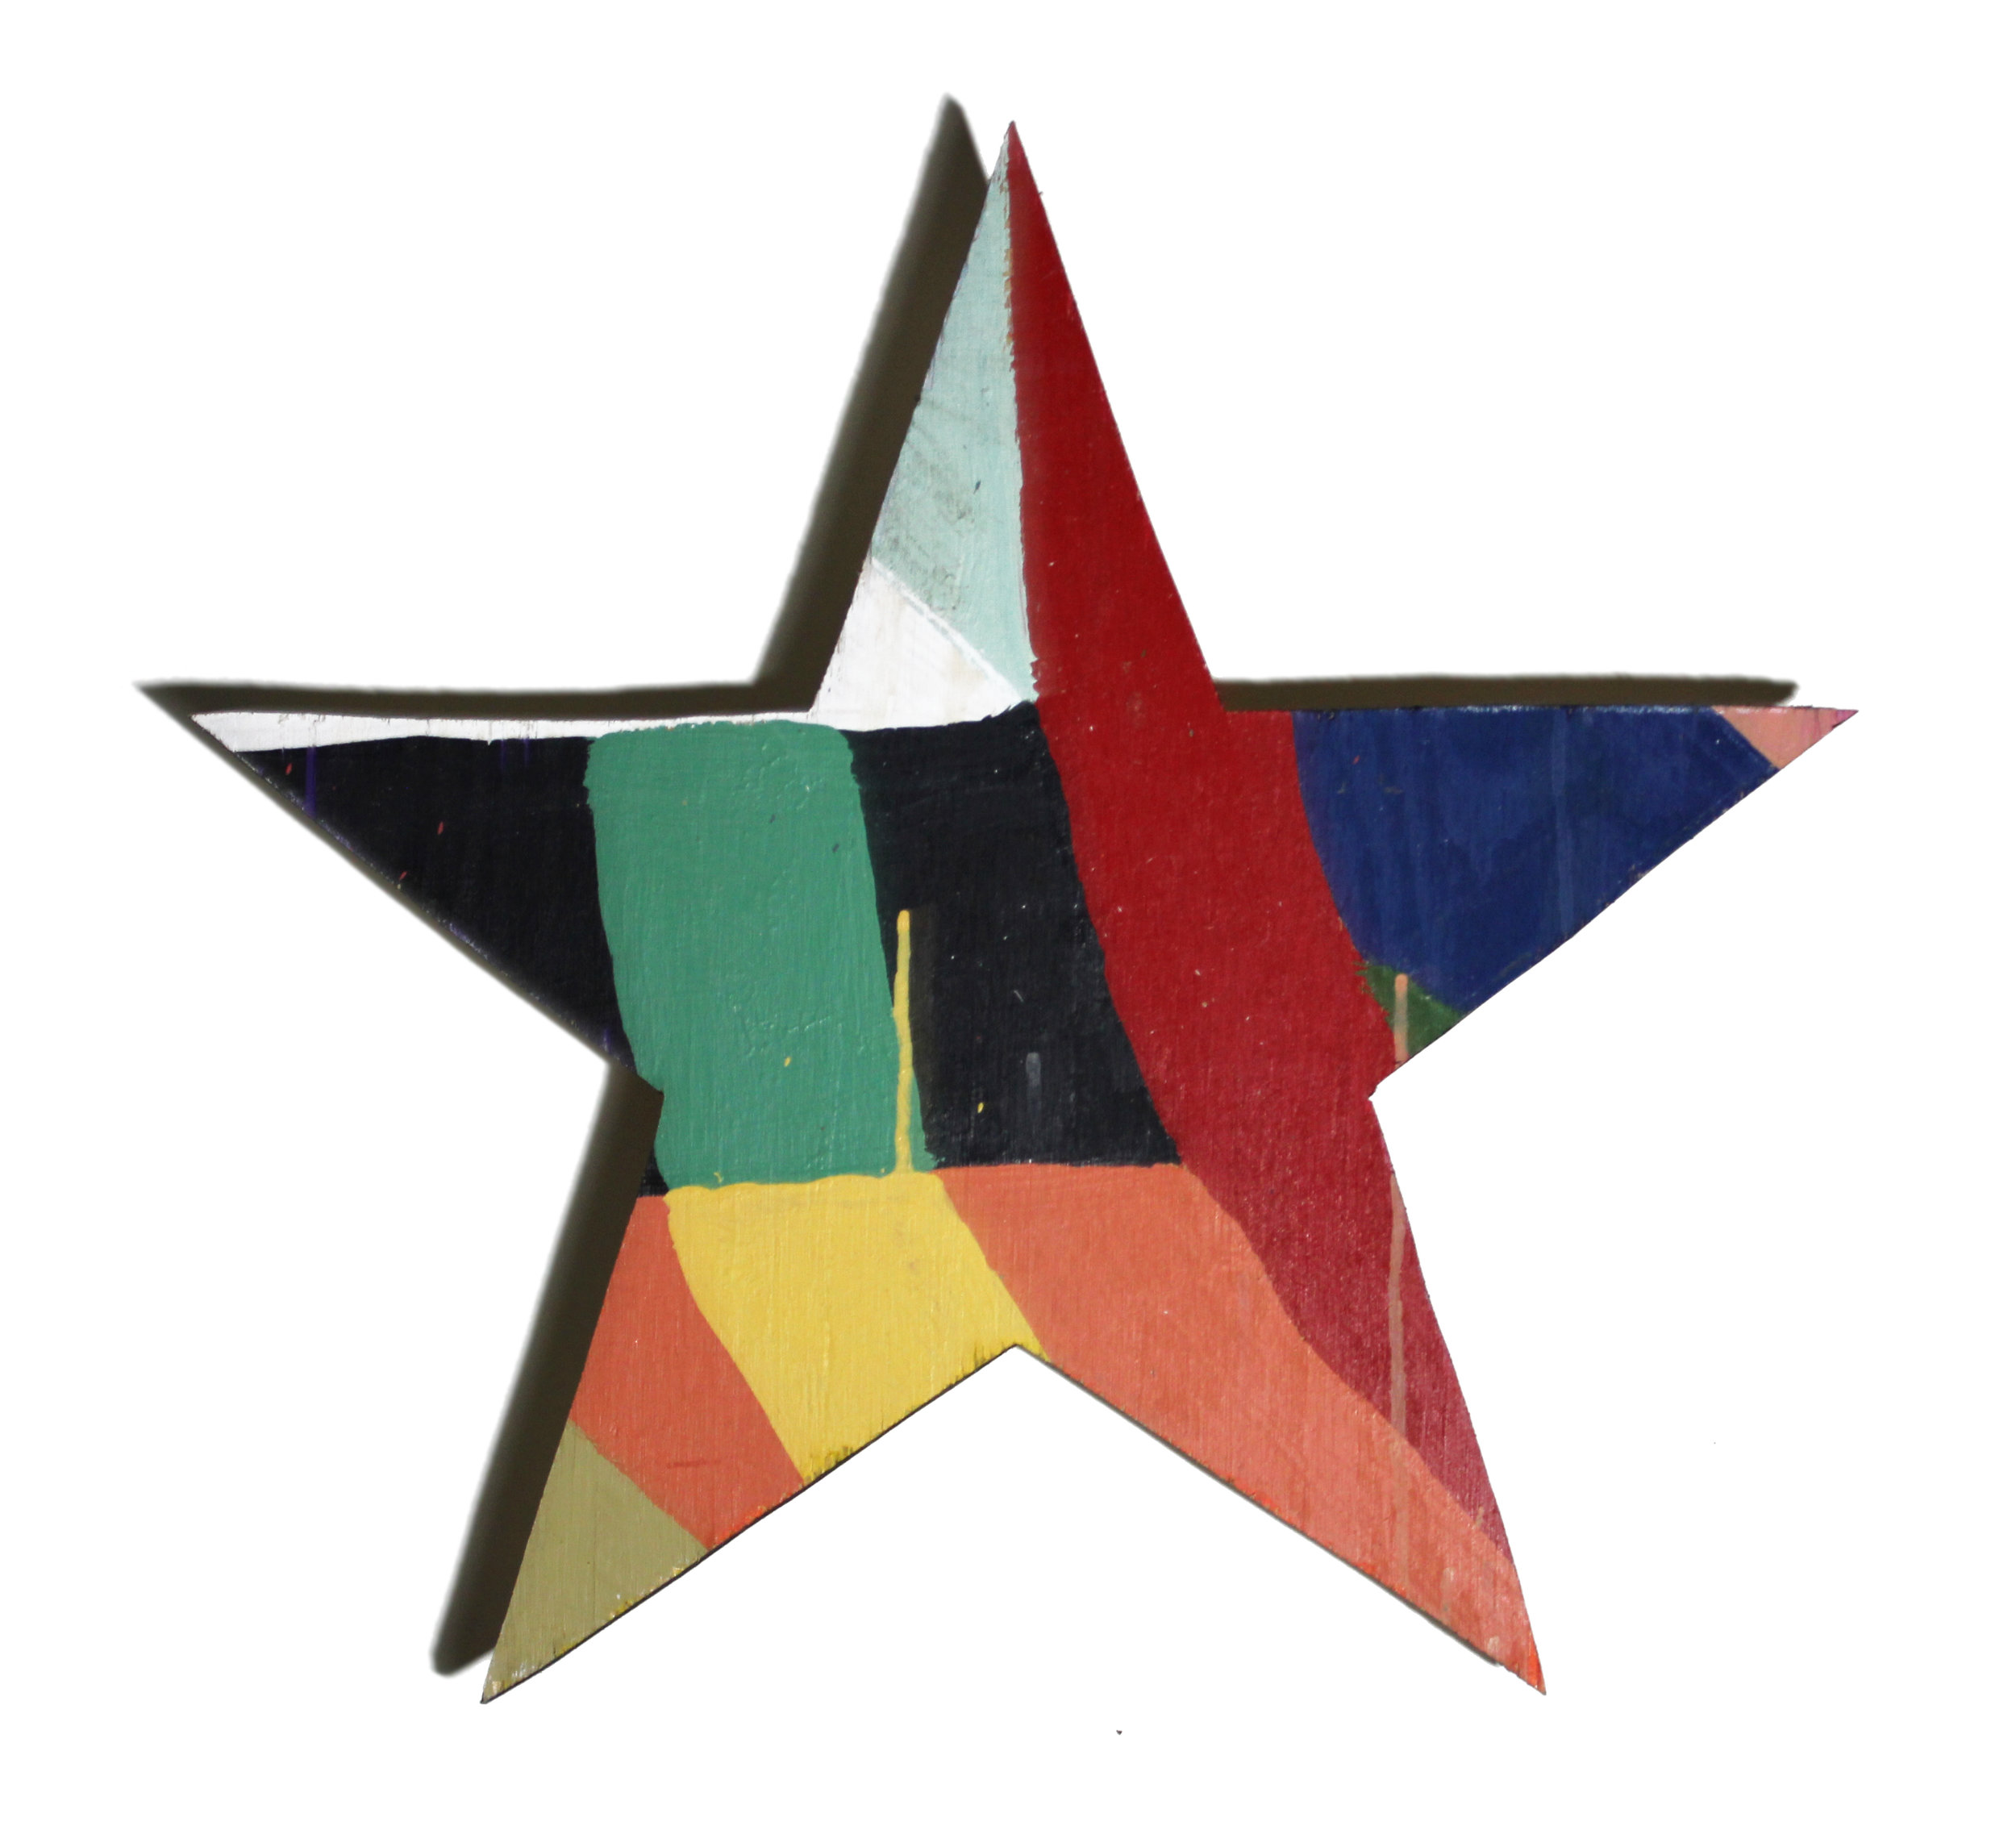   Star  acrylic on wood. part of my Color Cut Outs series. 2016  exhibited -  Tru by Hilton during Reflections Of The Big Book 2023;   Boynton Beach Arts and Cultural Center 2021; General Provision during Color Cut Outs 2016  